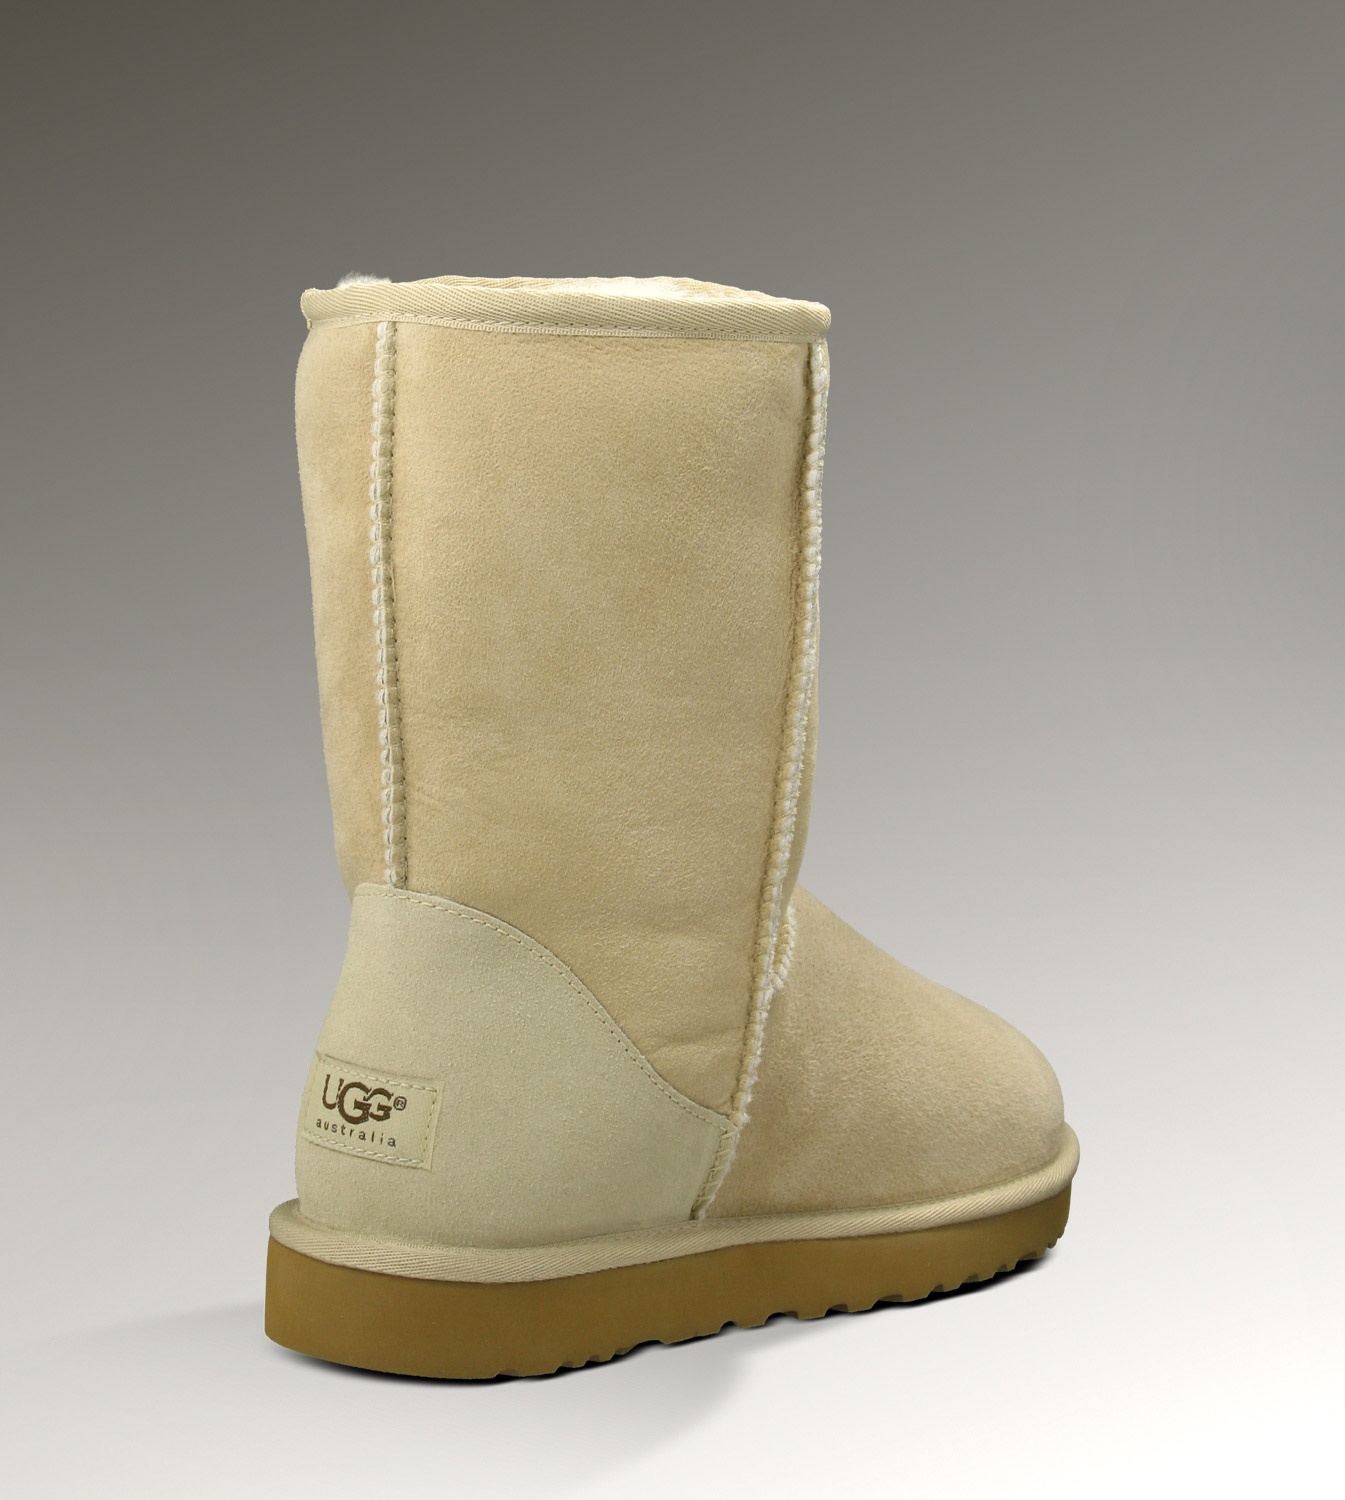 Ugg Outlet Classic Short Sand Boots 682750